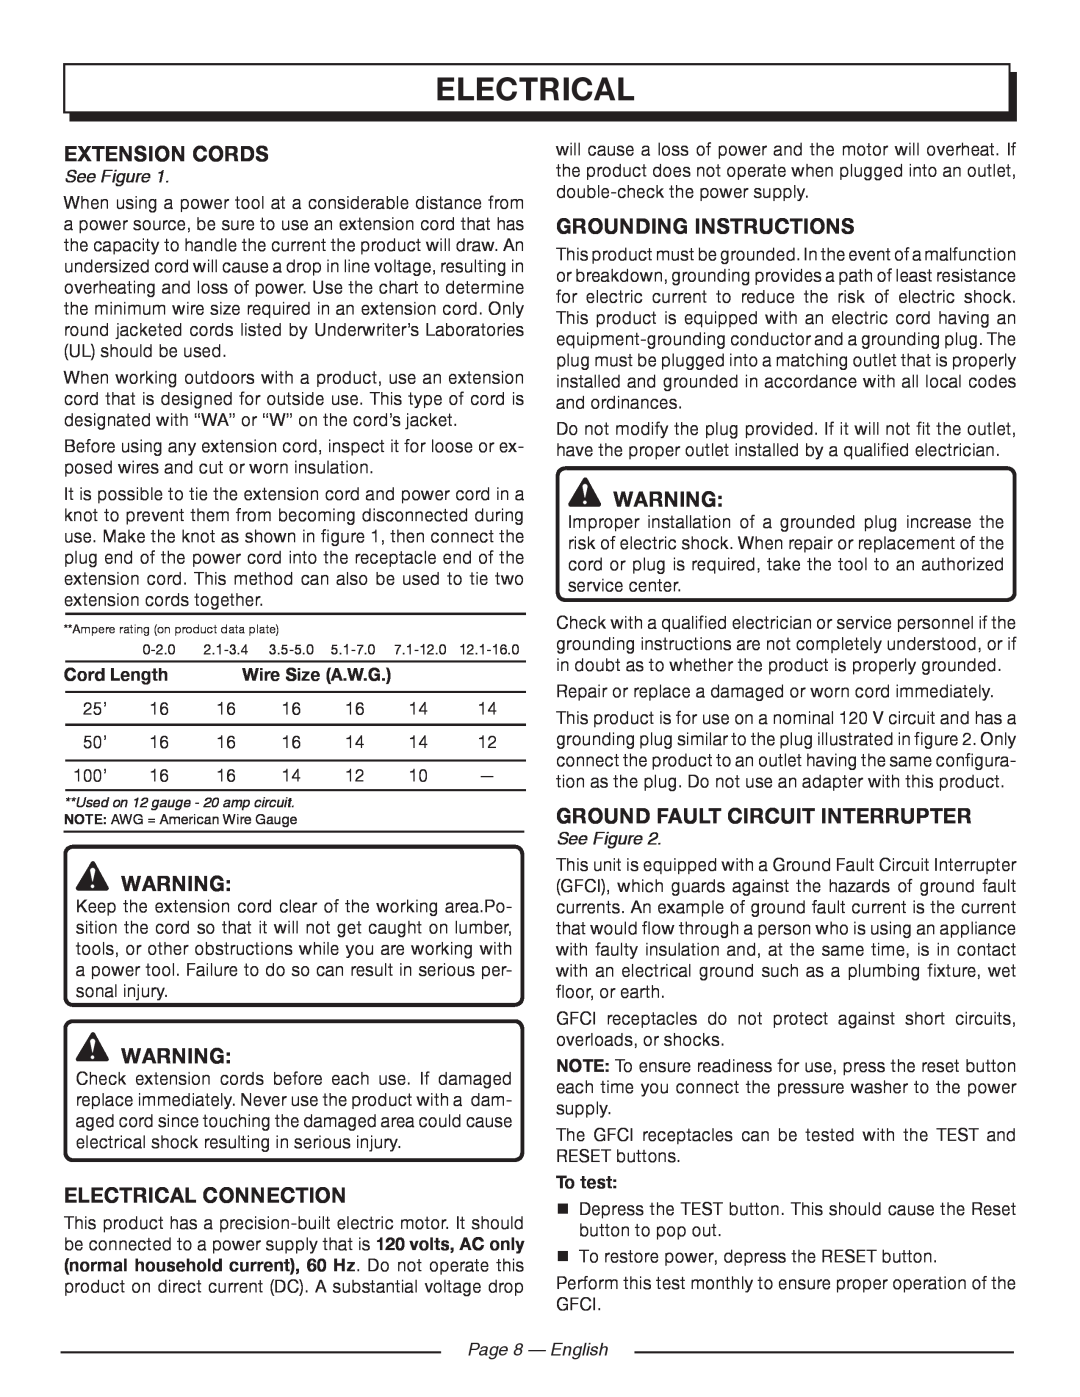 Homelite UT80720 Electrical Connection, Grounding Instructions, Ground Fault Circuit Interrupter, See Figure 